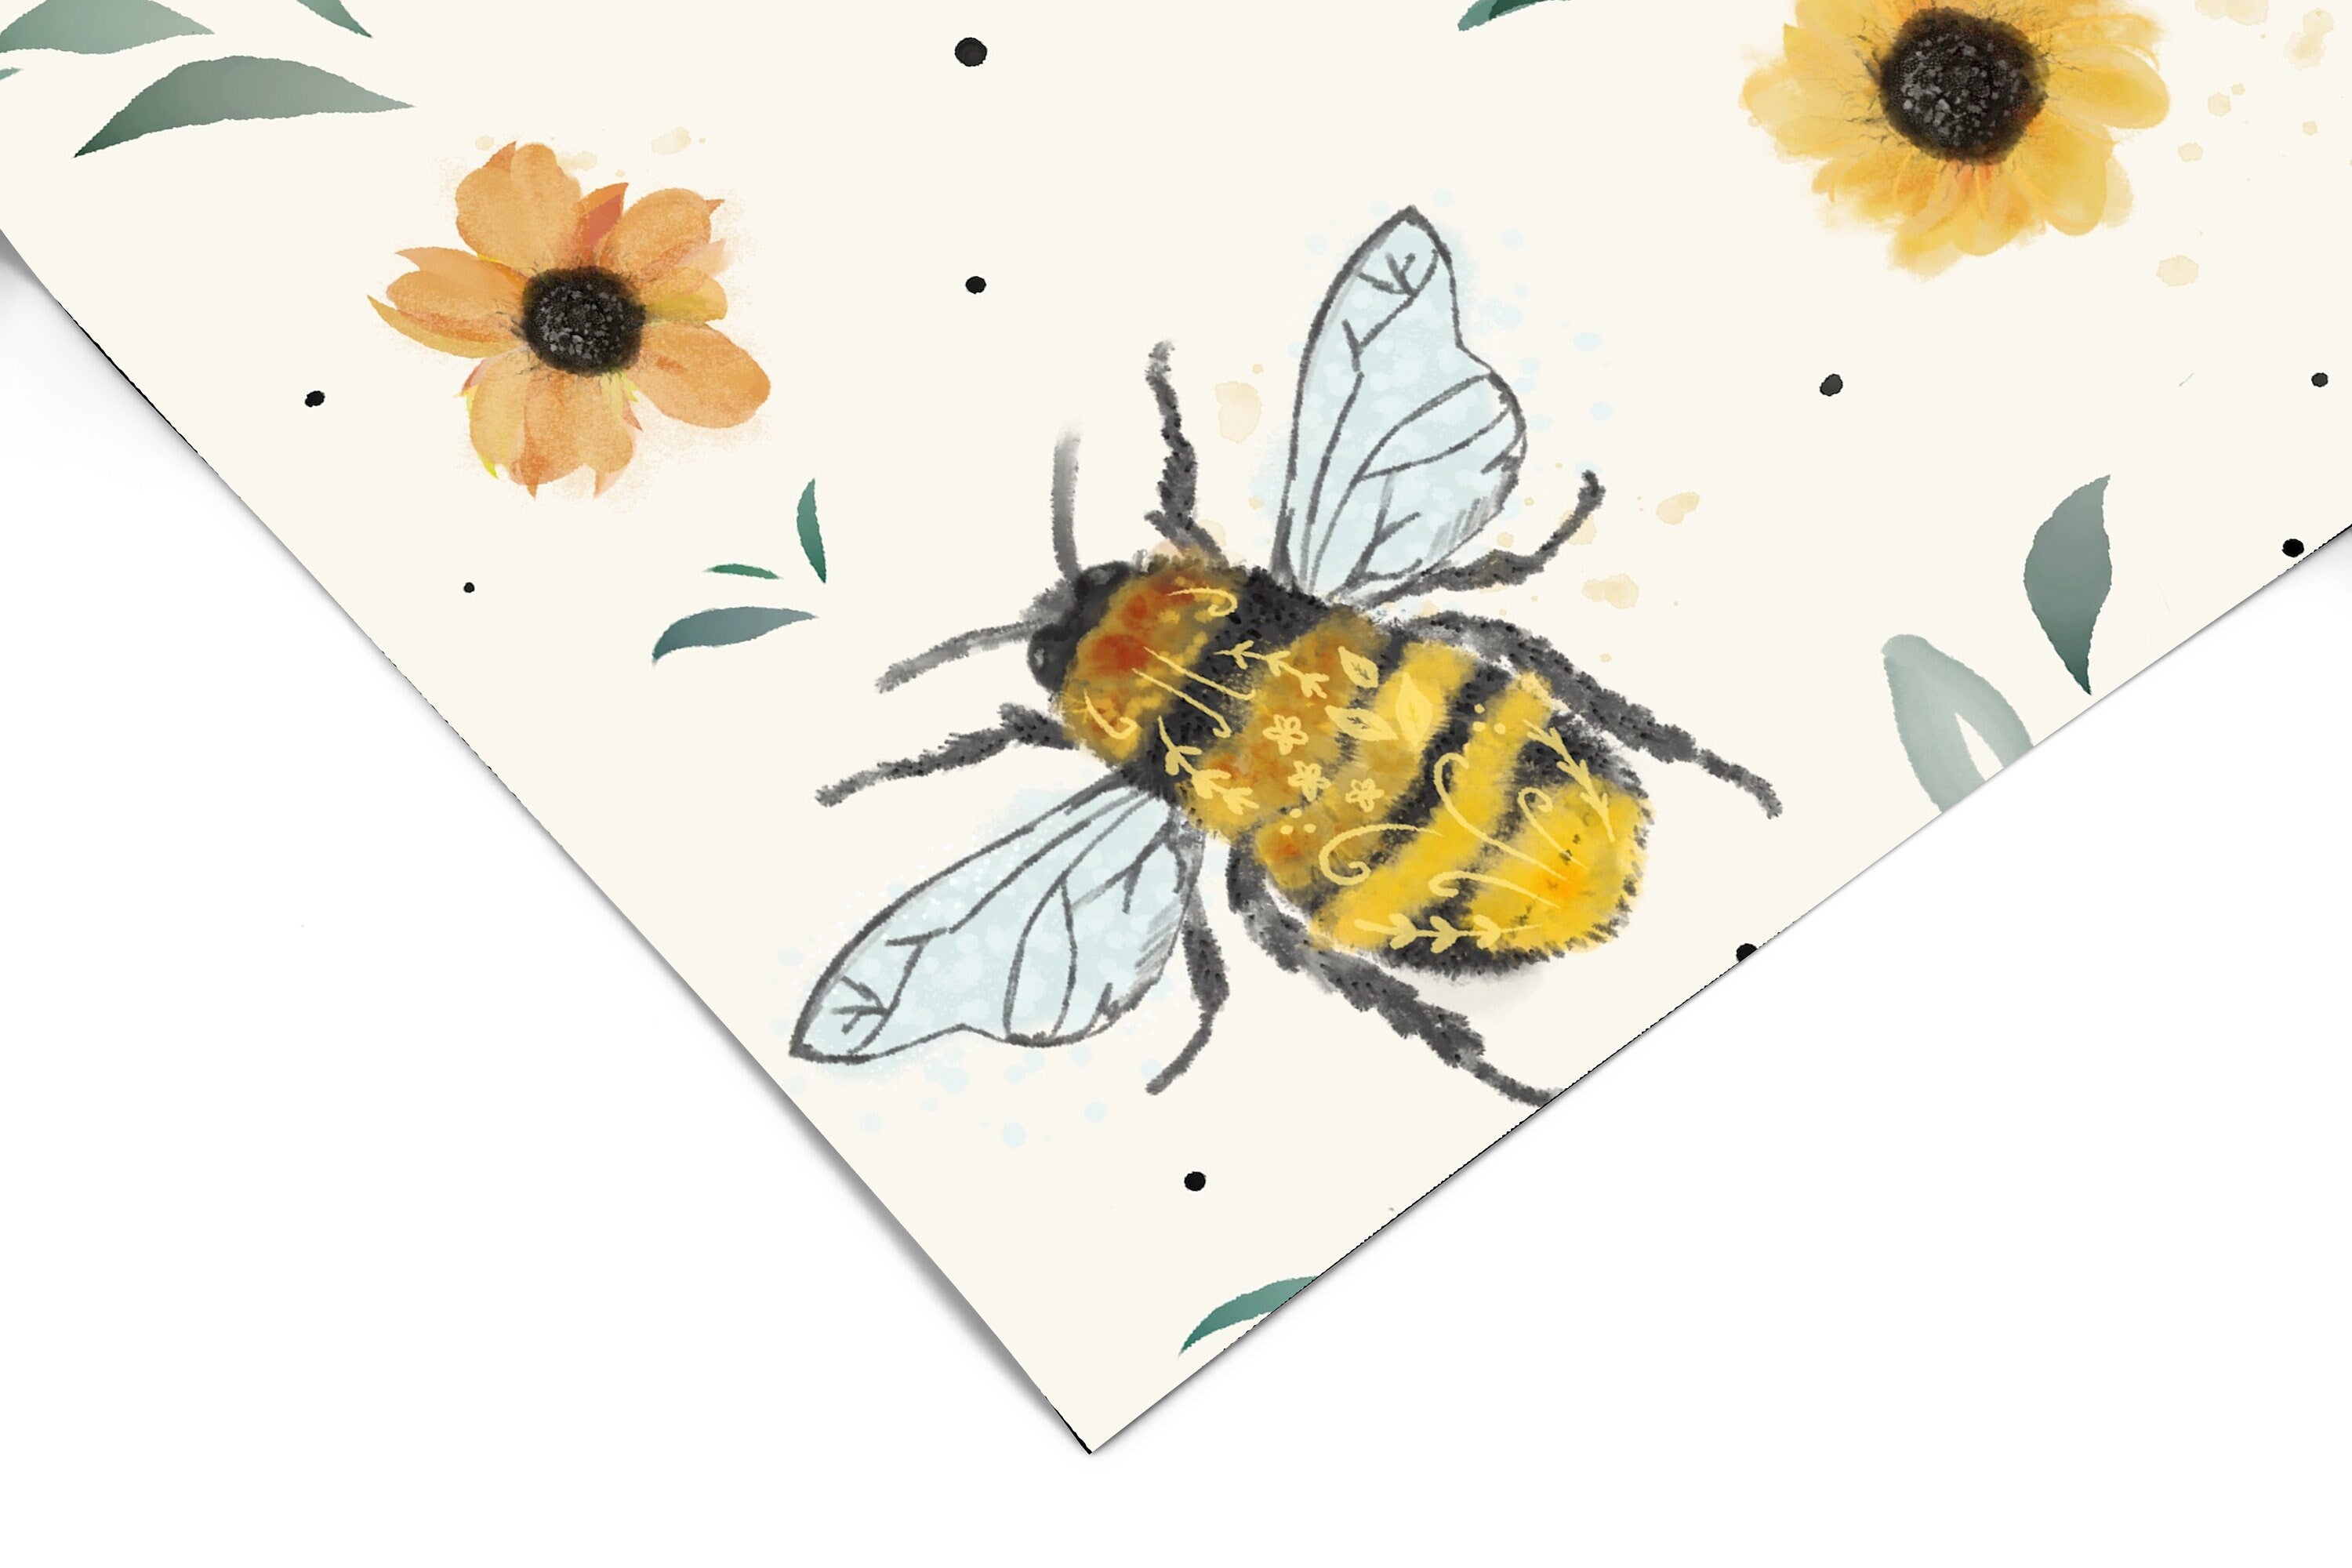 Floral Bumblebee Wallpaper Peel and Stick Wallpaper Removable Wallpaper Wall Decor Home Decor Wall Art Printable Wall Art Room Decor 148 - JamesAndColors